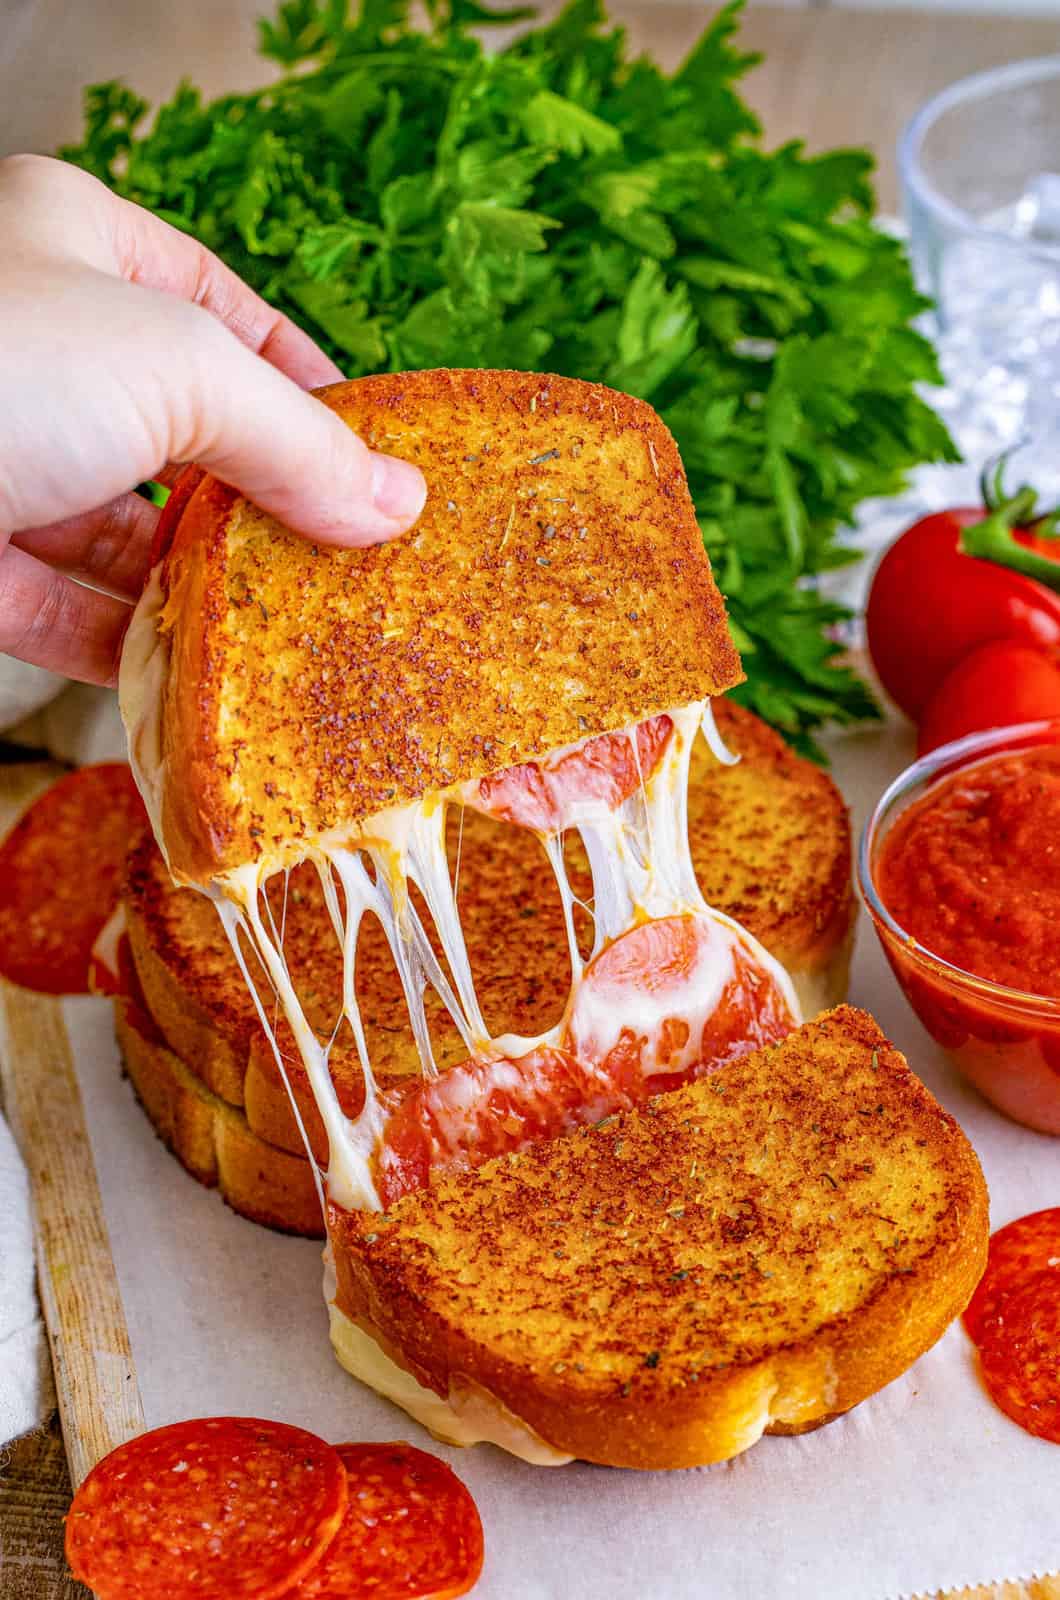 A person's hand holding a gooey cheese pull from a slice of pepperoni pizza toast, perfect for easy dinner ideas, with fresh tomatoes, parsley, and more pepperoni slices visible in the background